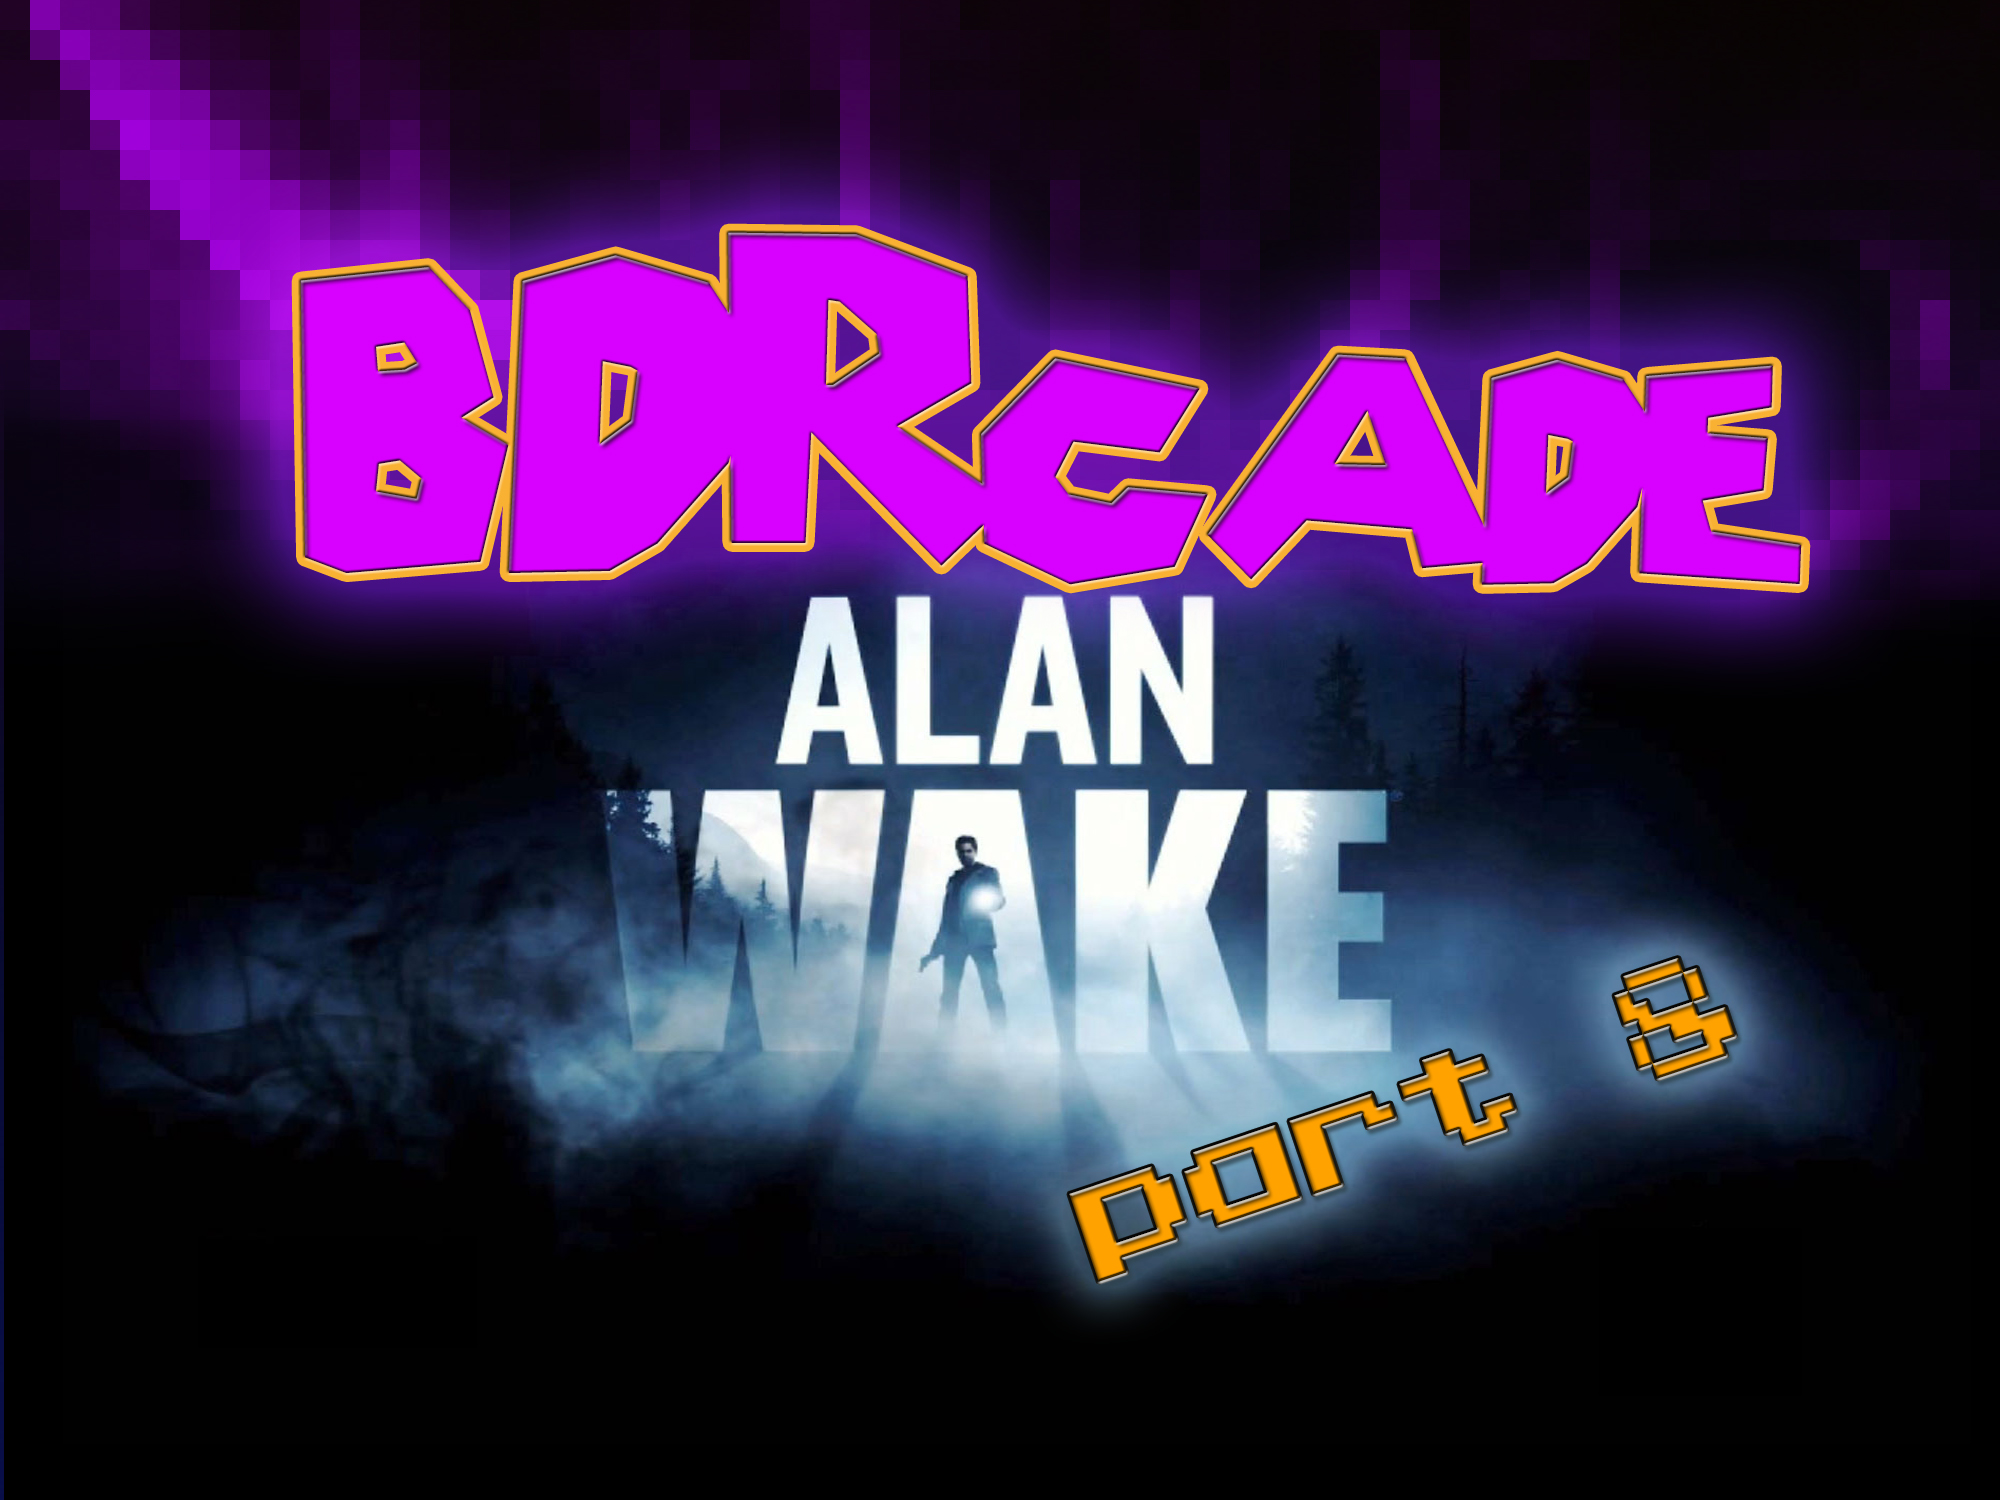 Alan Wake: Piers and Beers – PART 8 – BDRcade